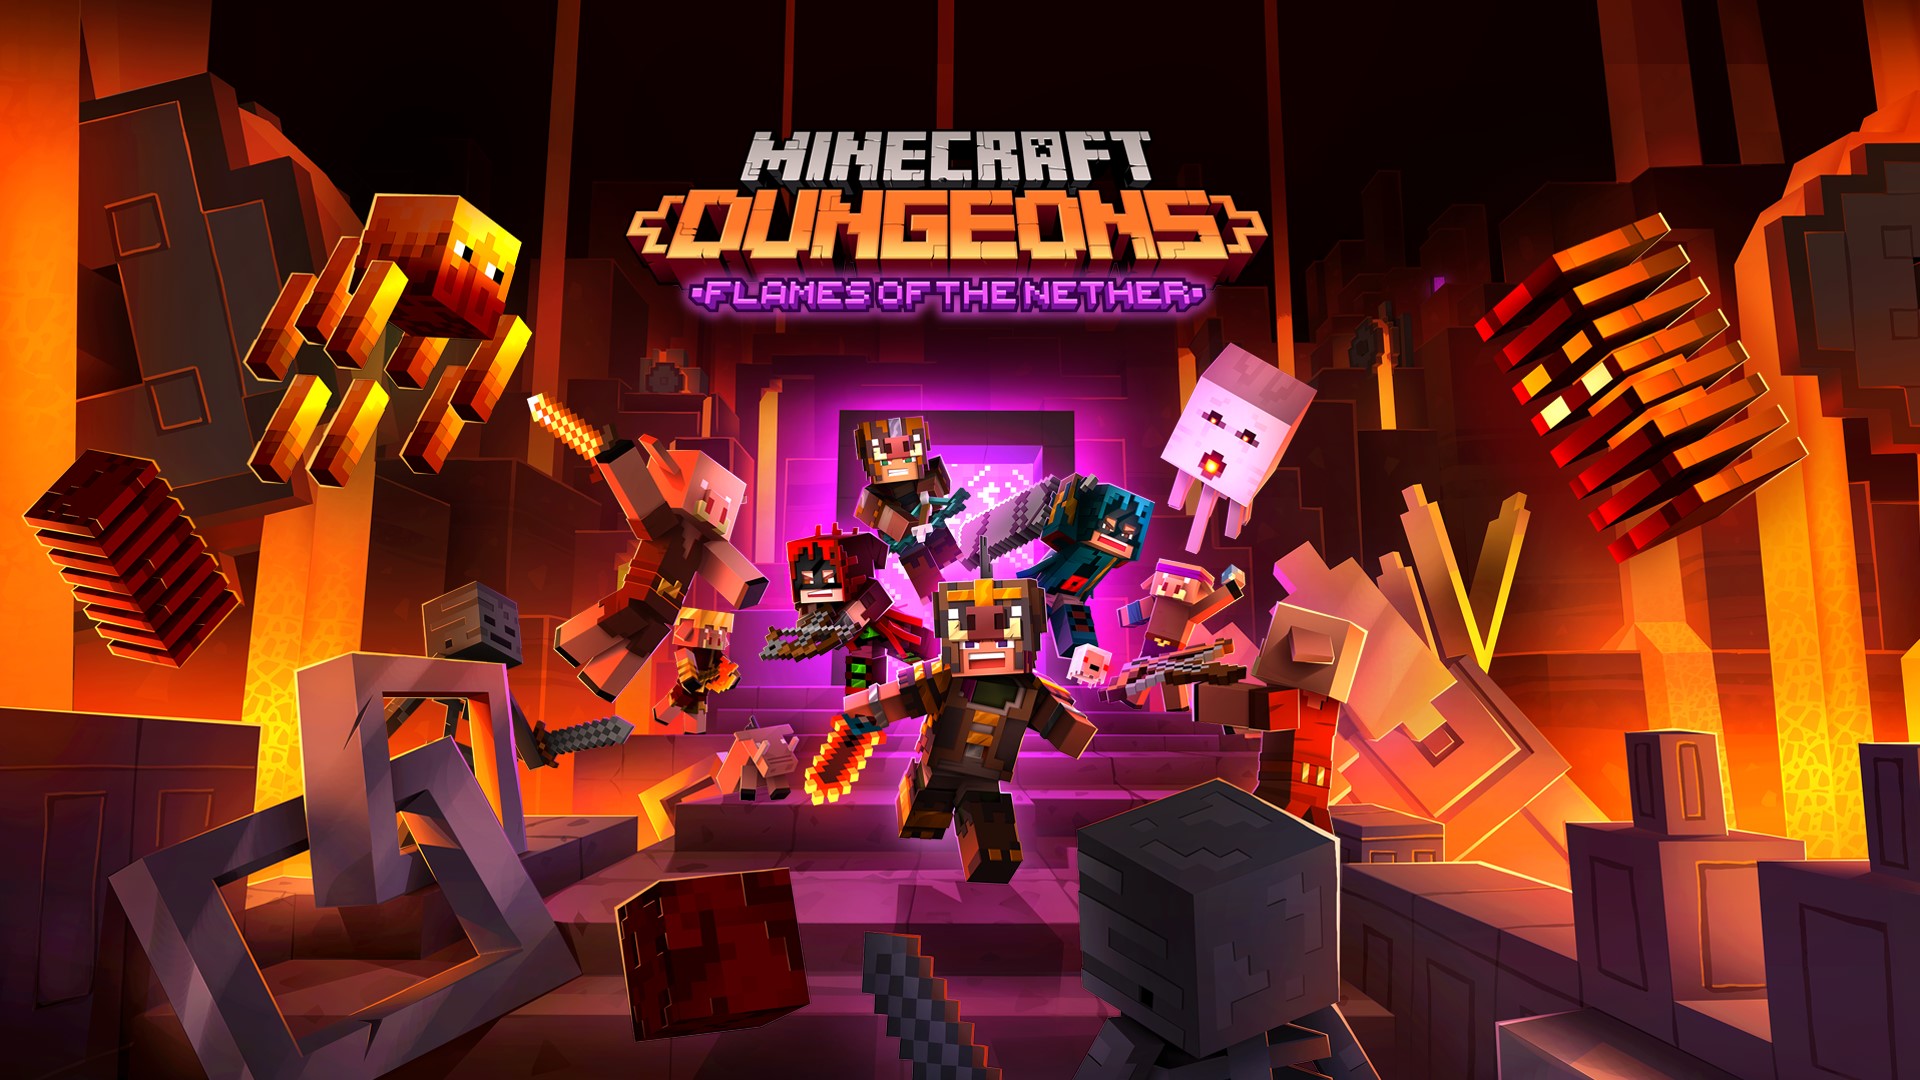 Coming November 2 to Xbox Game Pass for PC: Minecraft Java and Bedrock  Editions - Xbox Wire